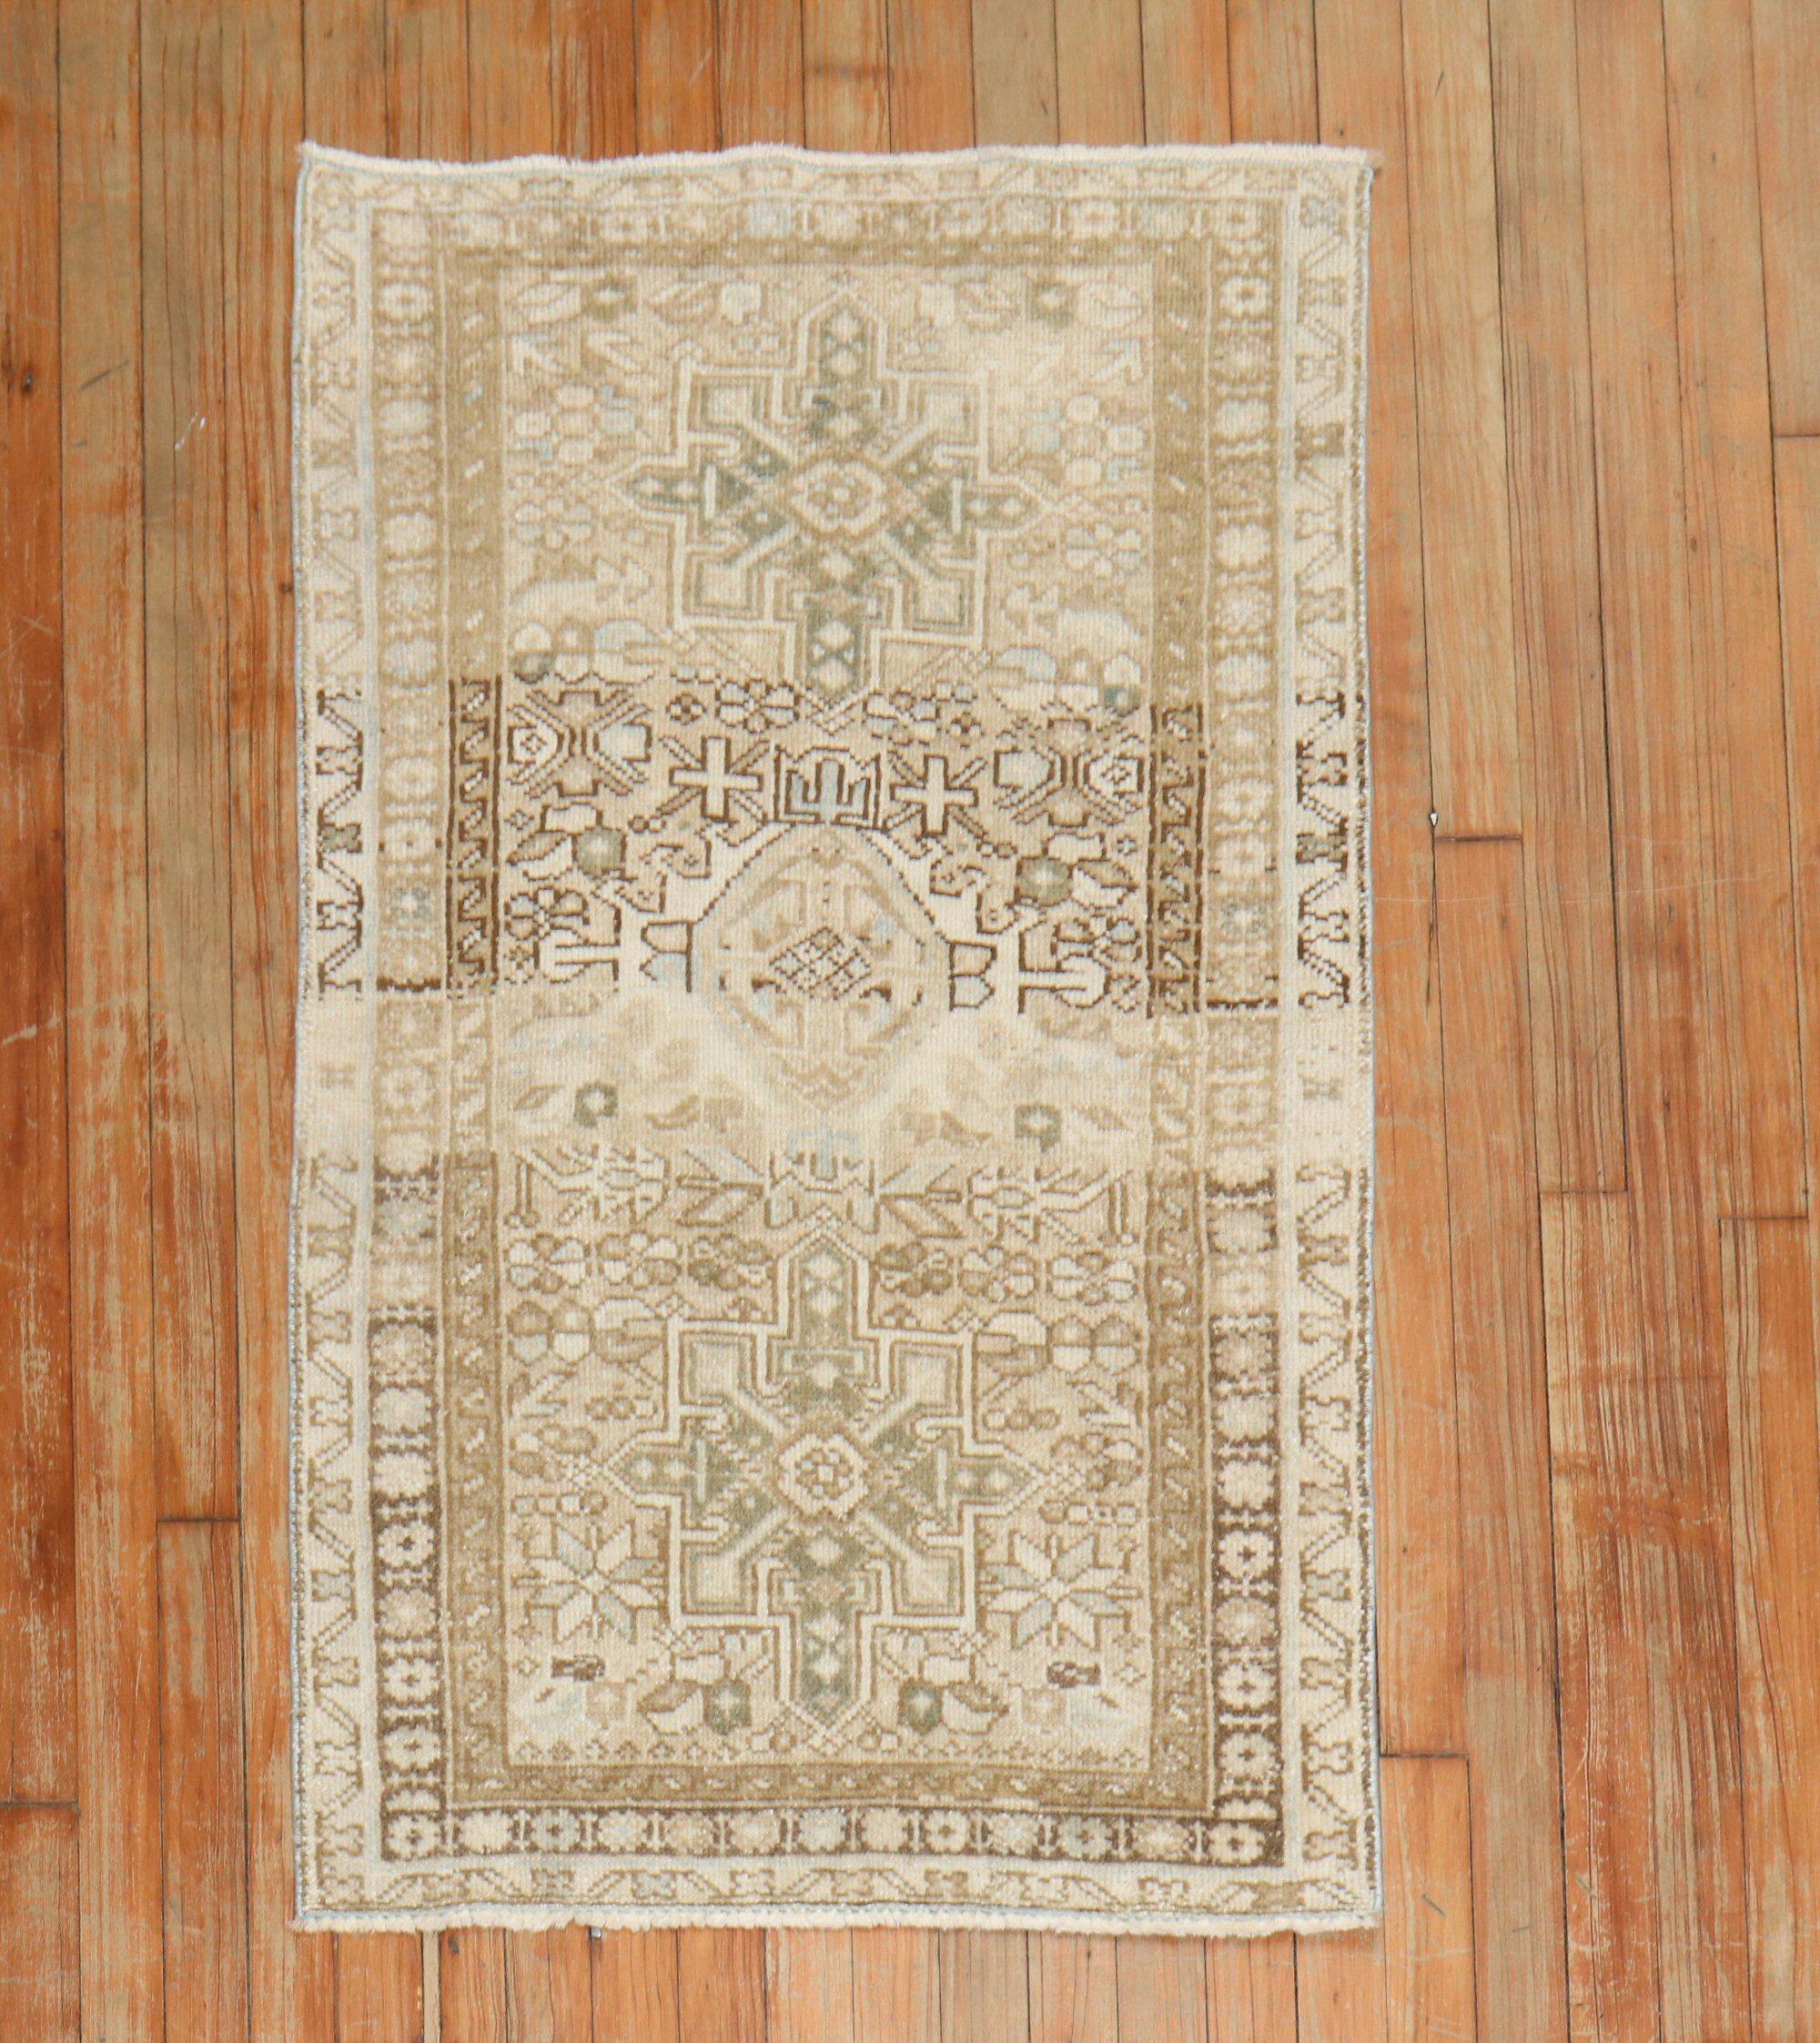 Geometric Accent rug perfect for a powder room or Kitchen. circa 1930

Details
rug no.	r5864
size	2' 6